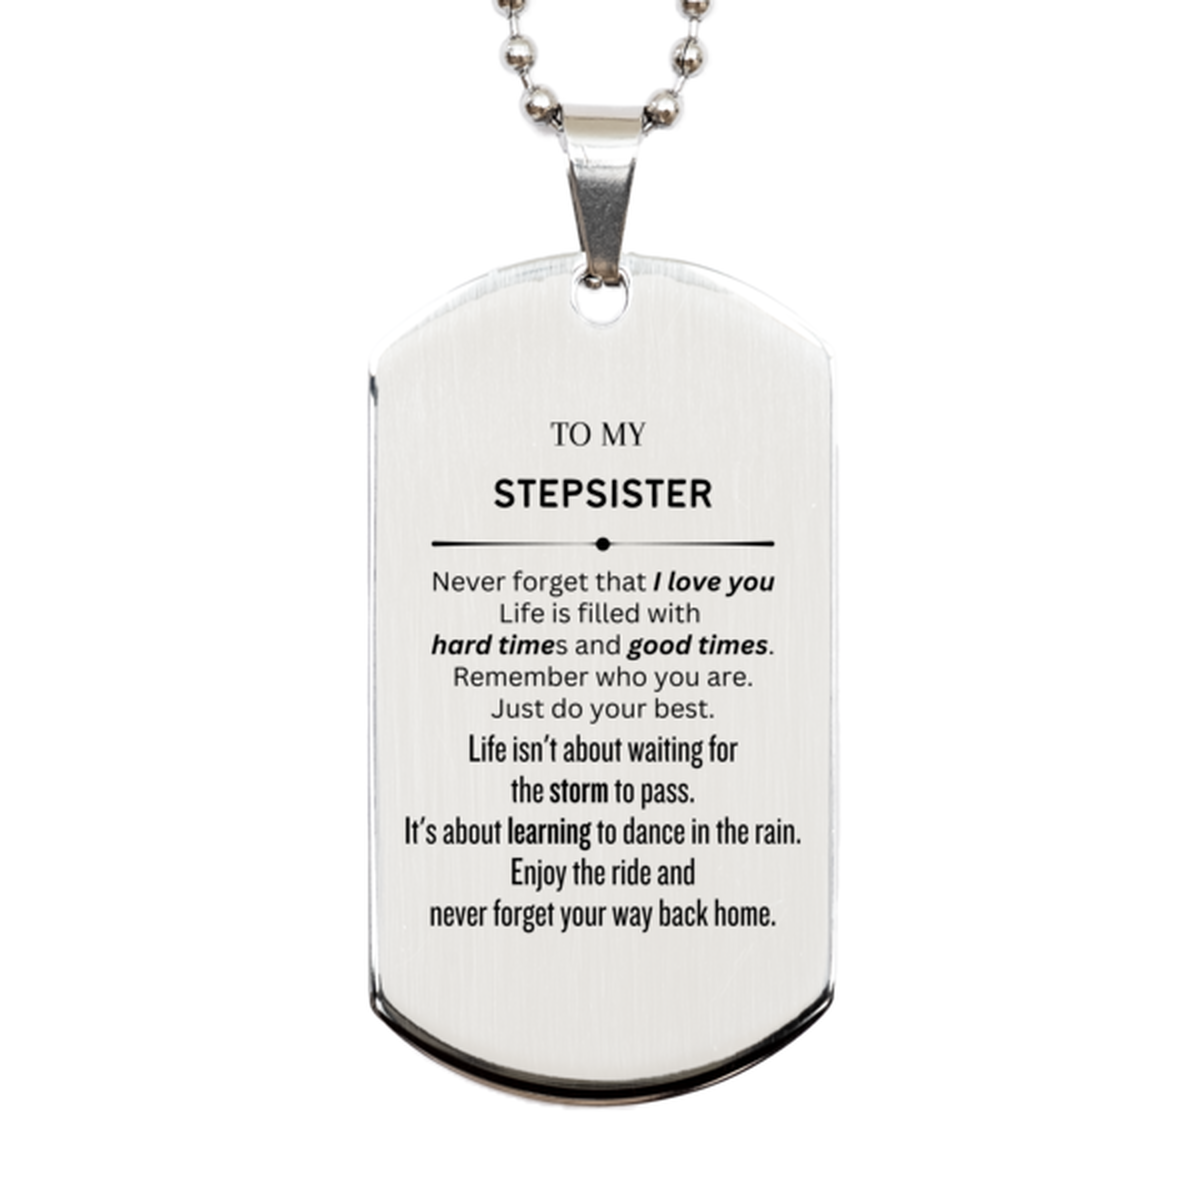 Christmas Stepsister Silver Dog Tag Gifts, To My Stepsister Birthday Thank You Gifts For Stepsister, Graduation Unique Gifts For Stepsister To My Stepsister Never forget that I love you life is filled with hard times and good times. Remember who you are.